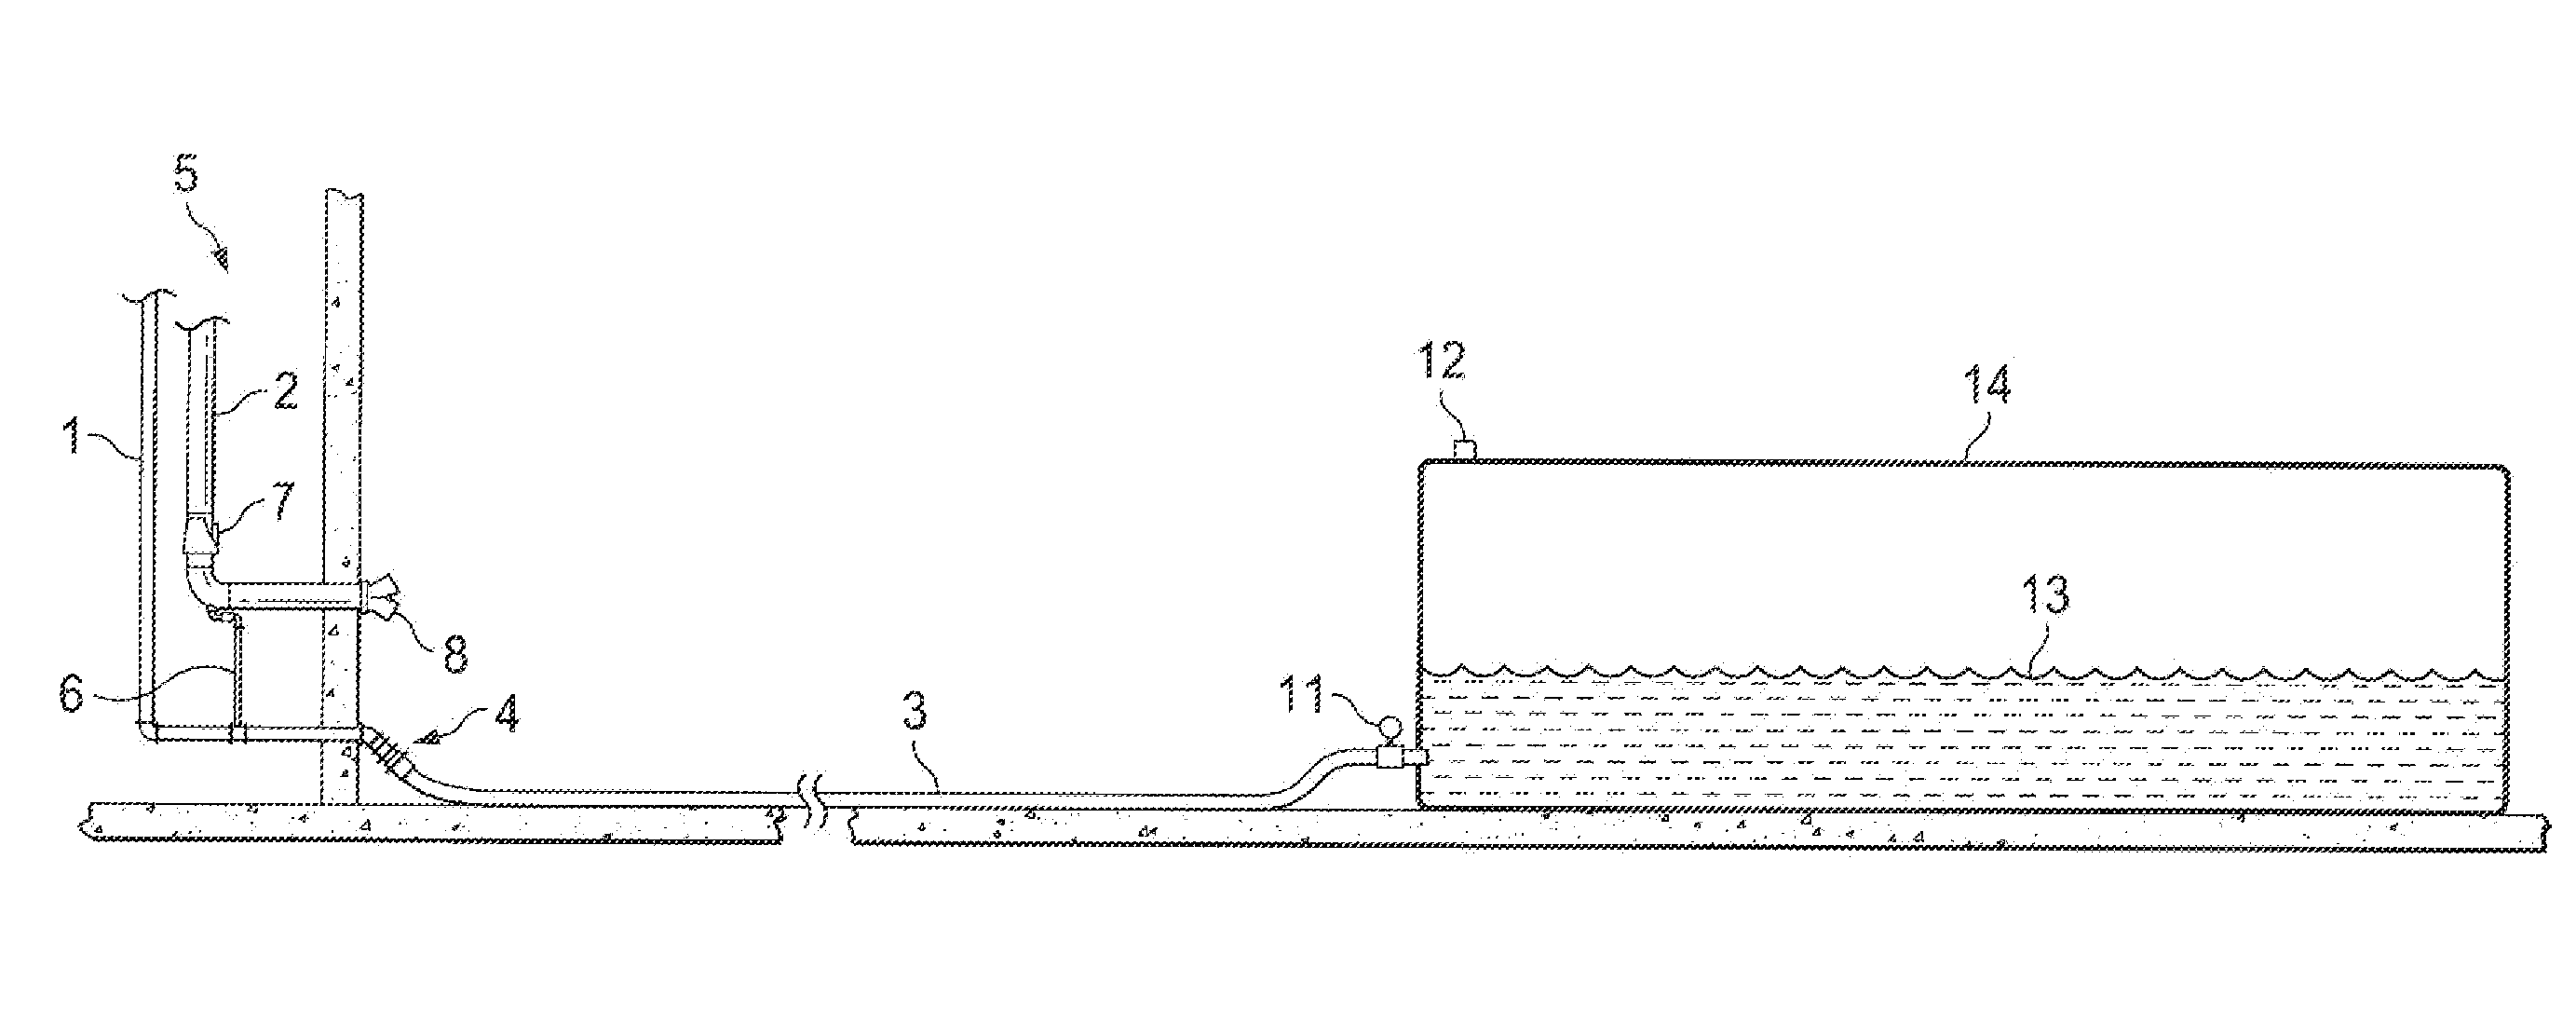 Collection and Recycling System for Contents of Sprinkler System